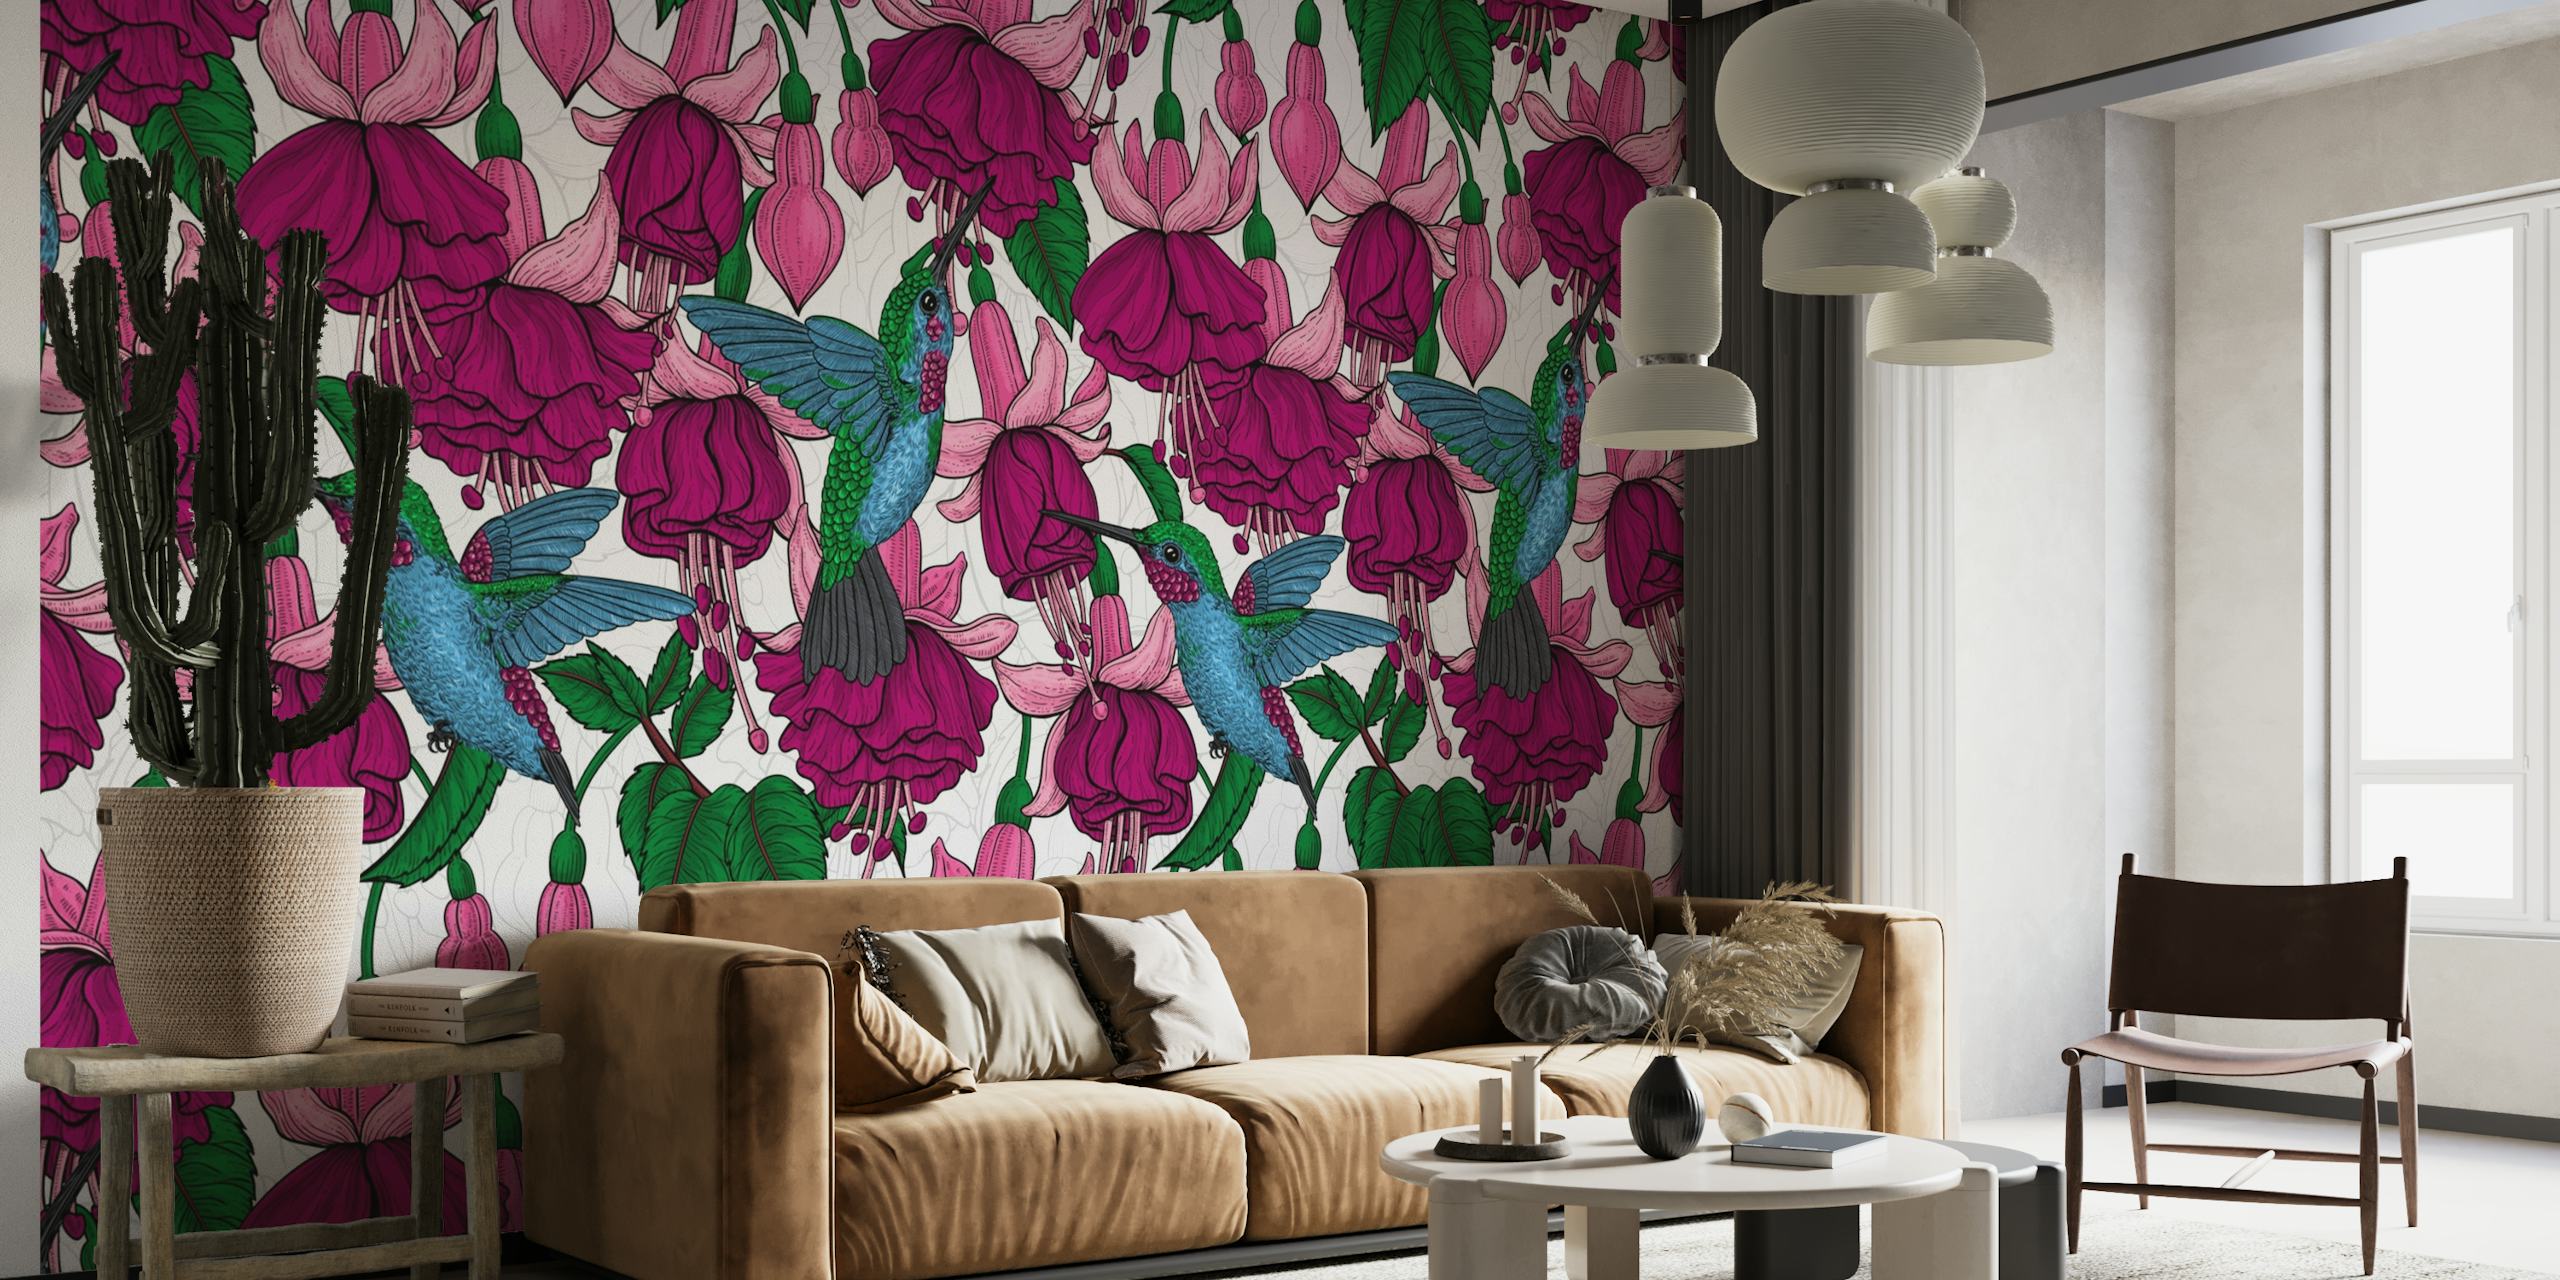 A wall mural with hummingbirds and pink fuchsia flowers creating an enchanting garden scene.